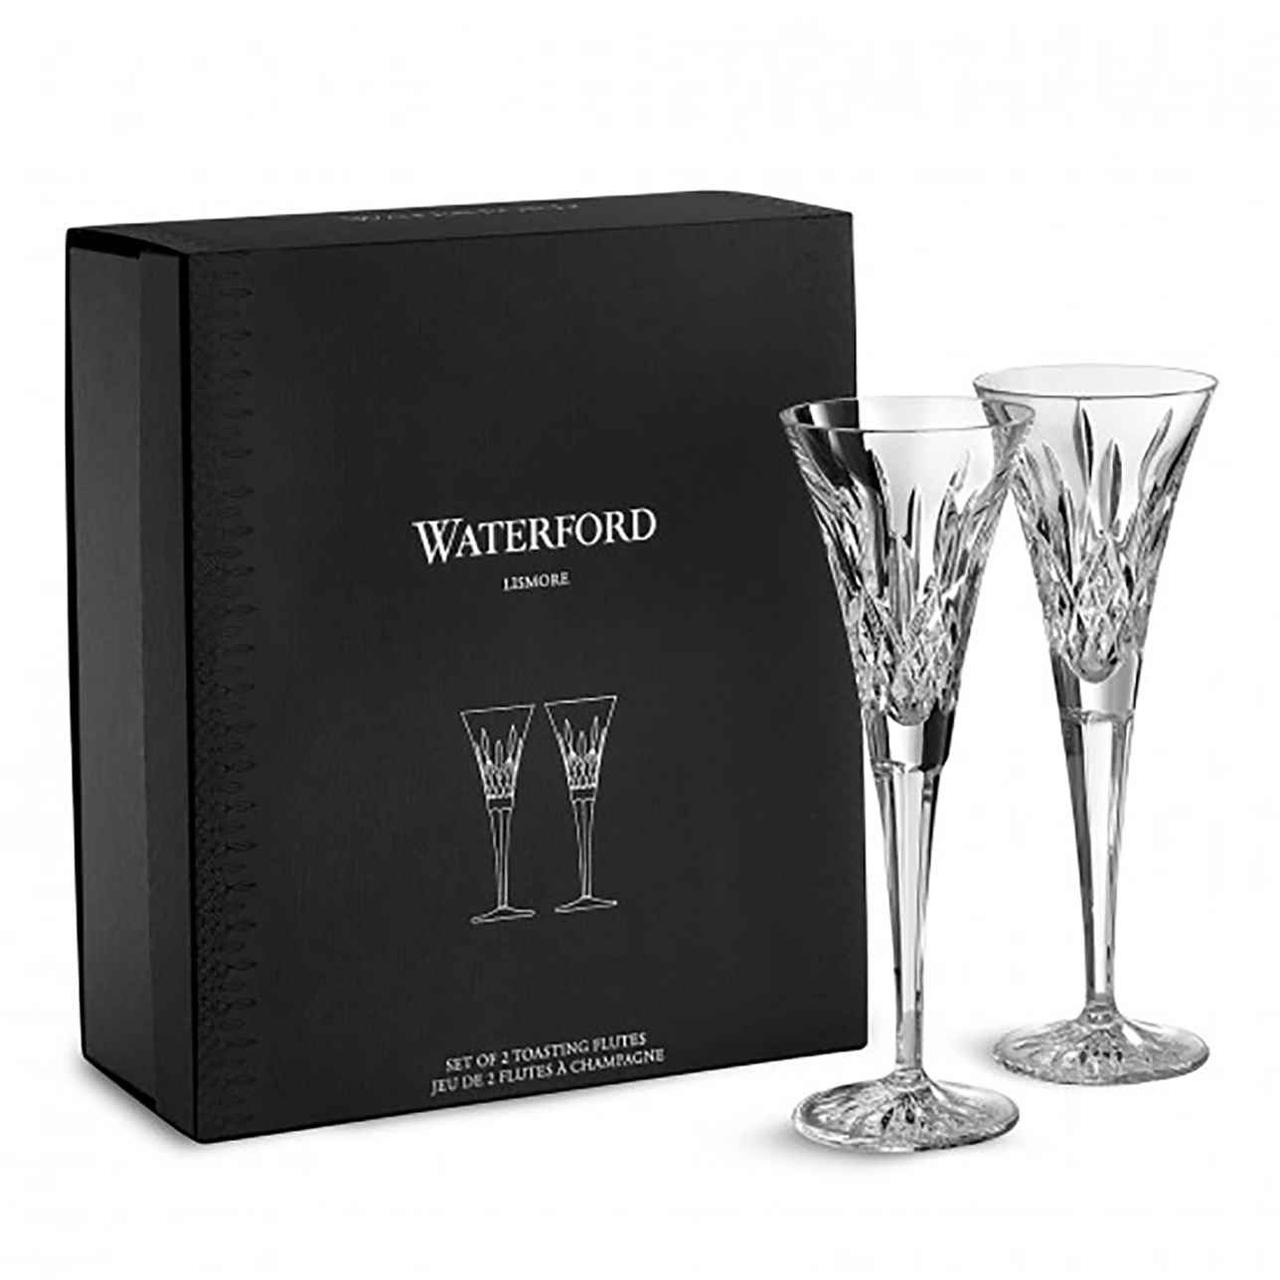 Waterford crystal wedding champagne flute set